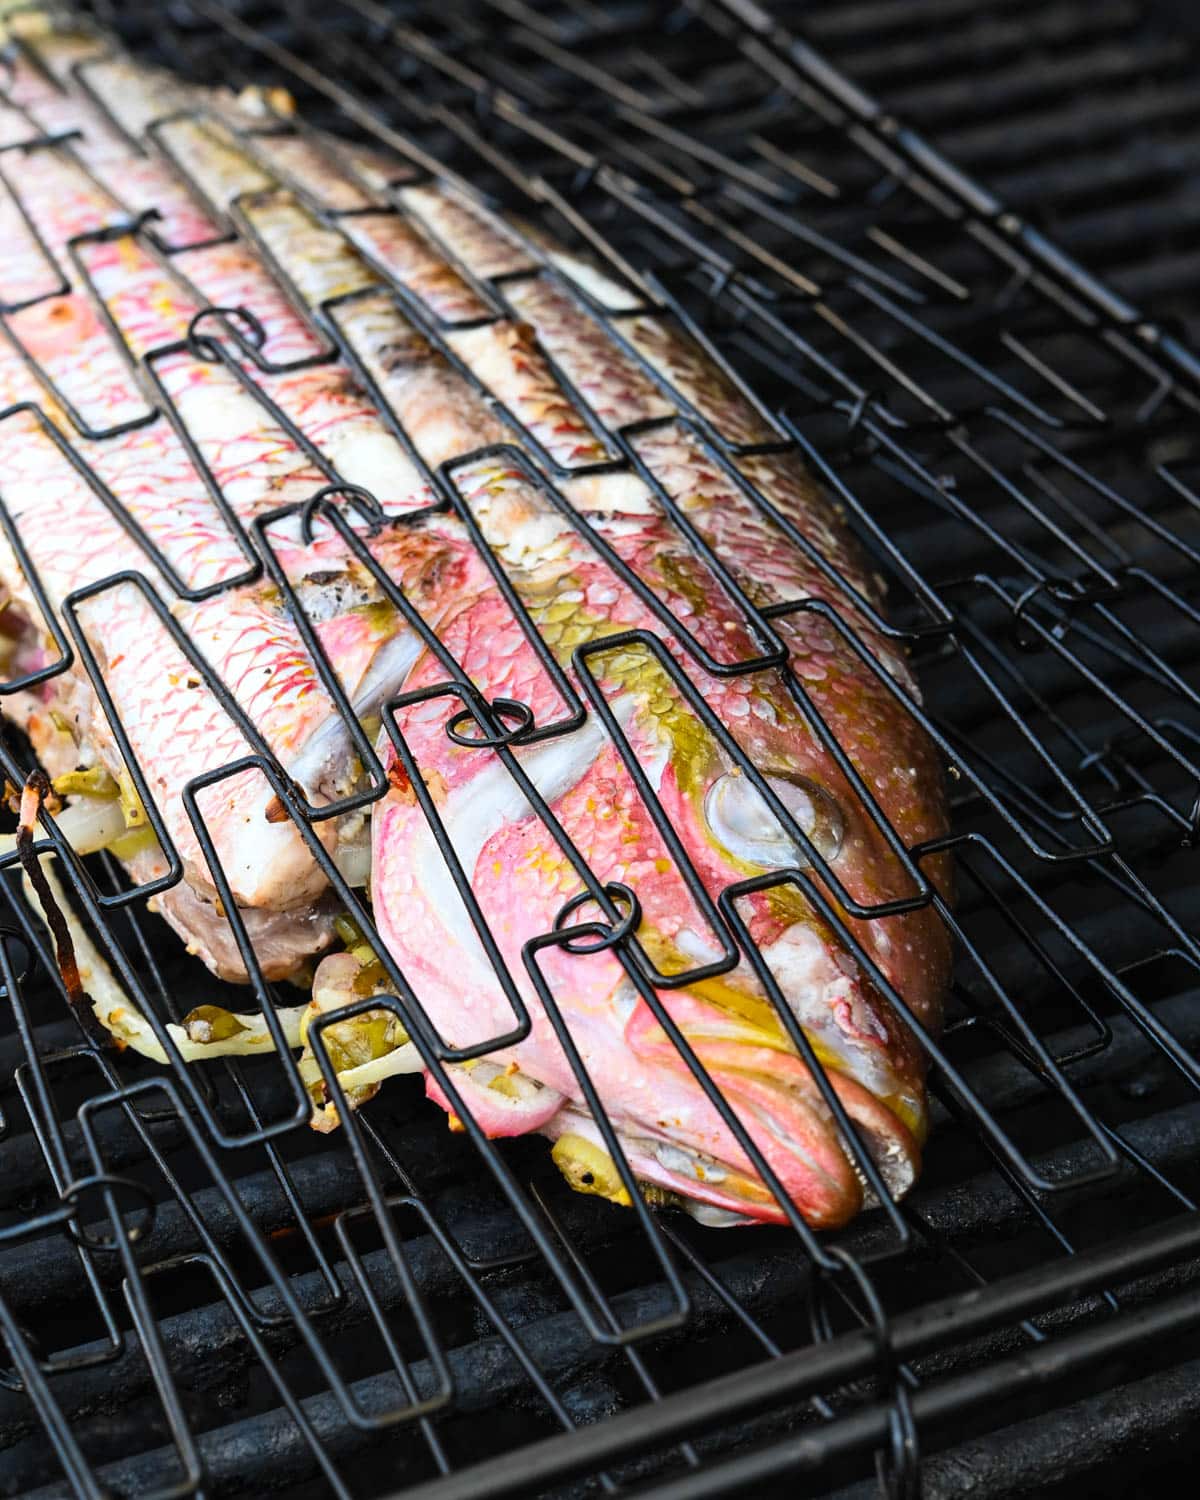 Grilling the yellowtail snapper.